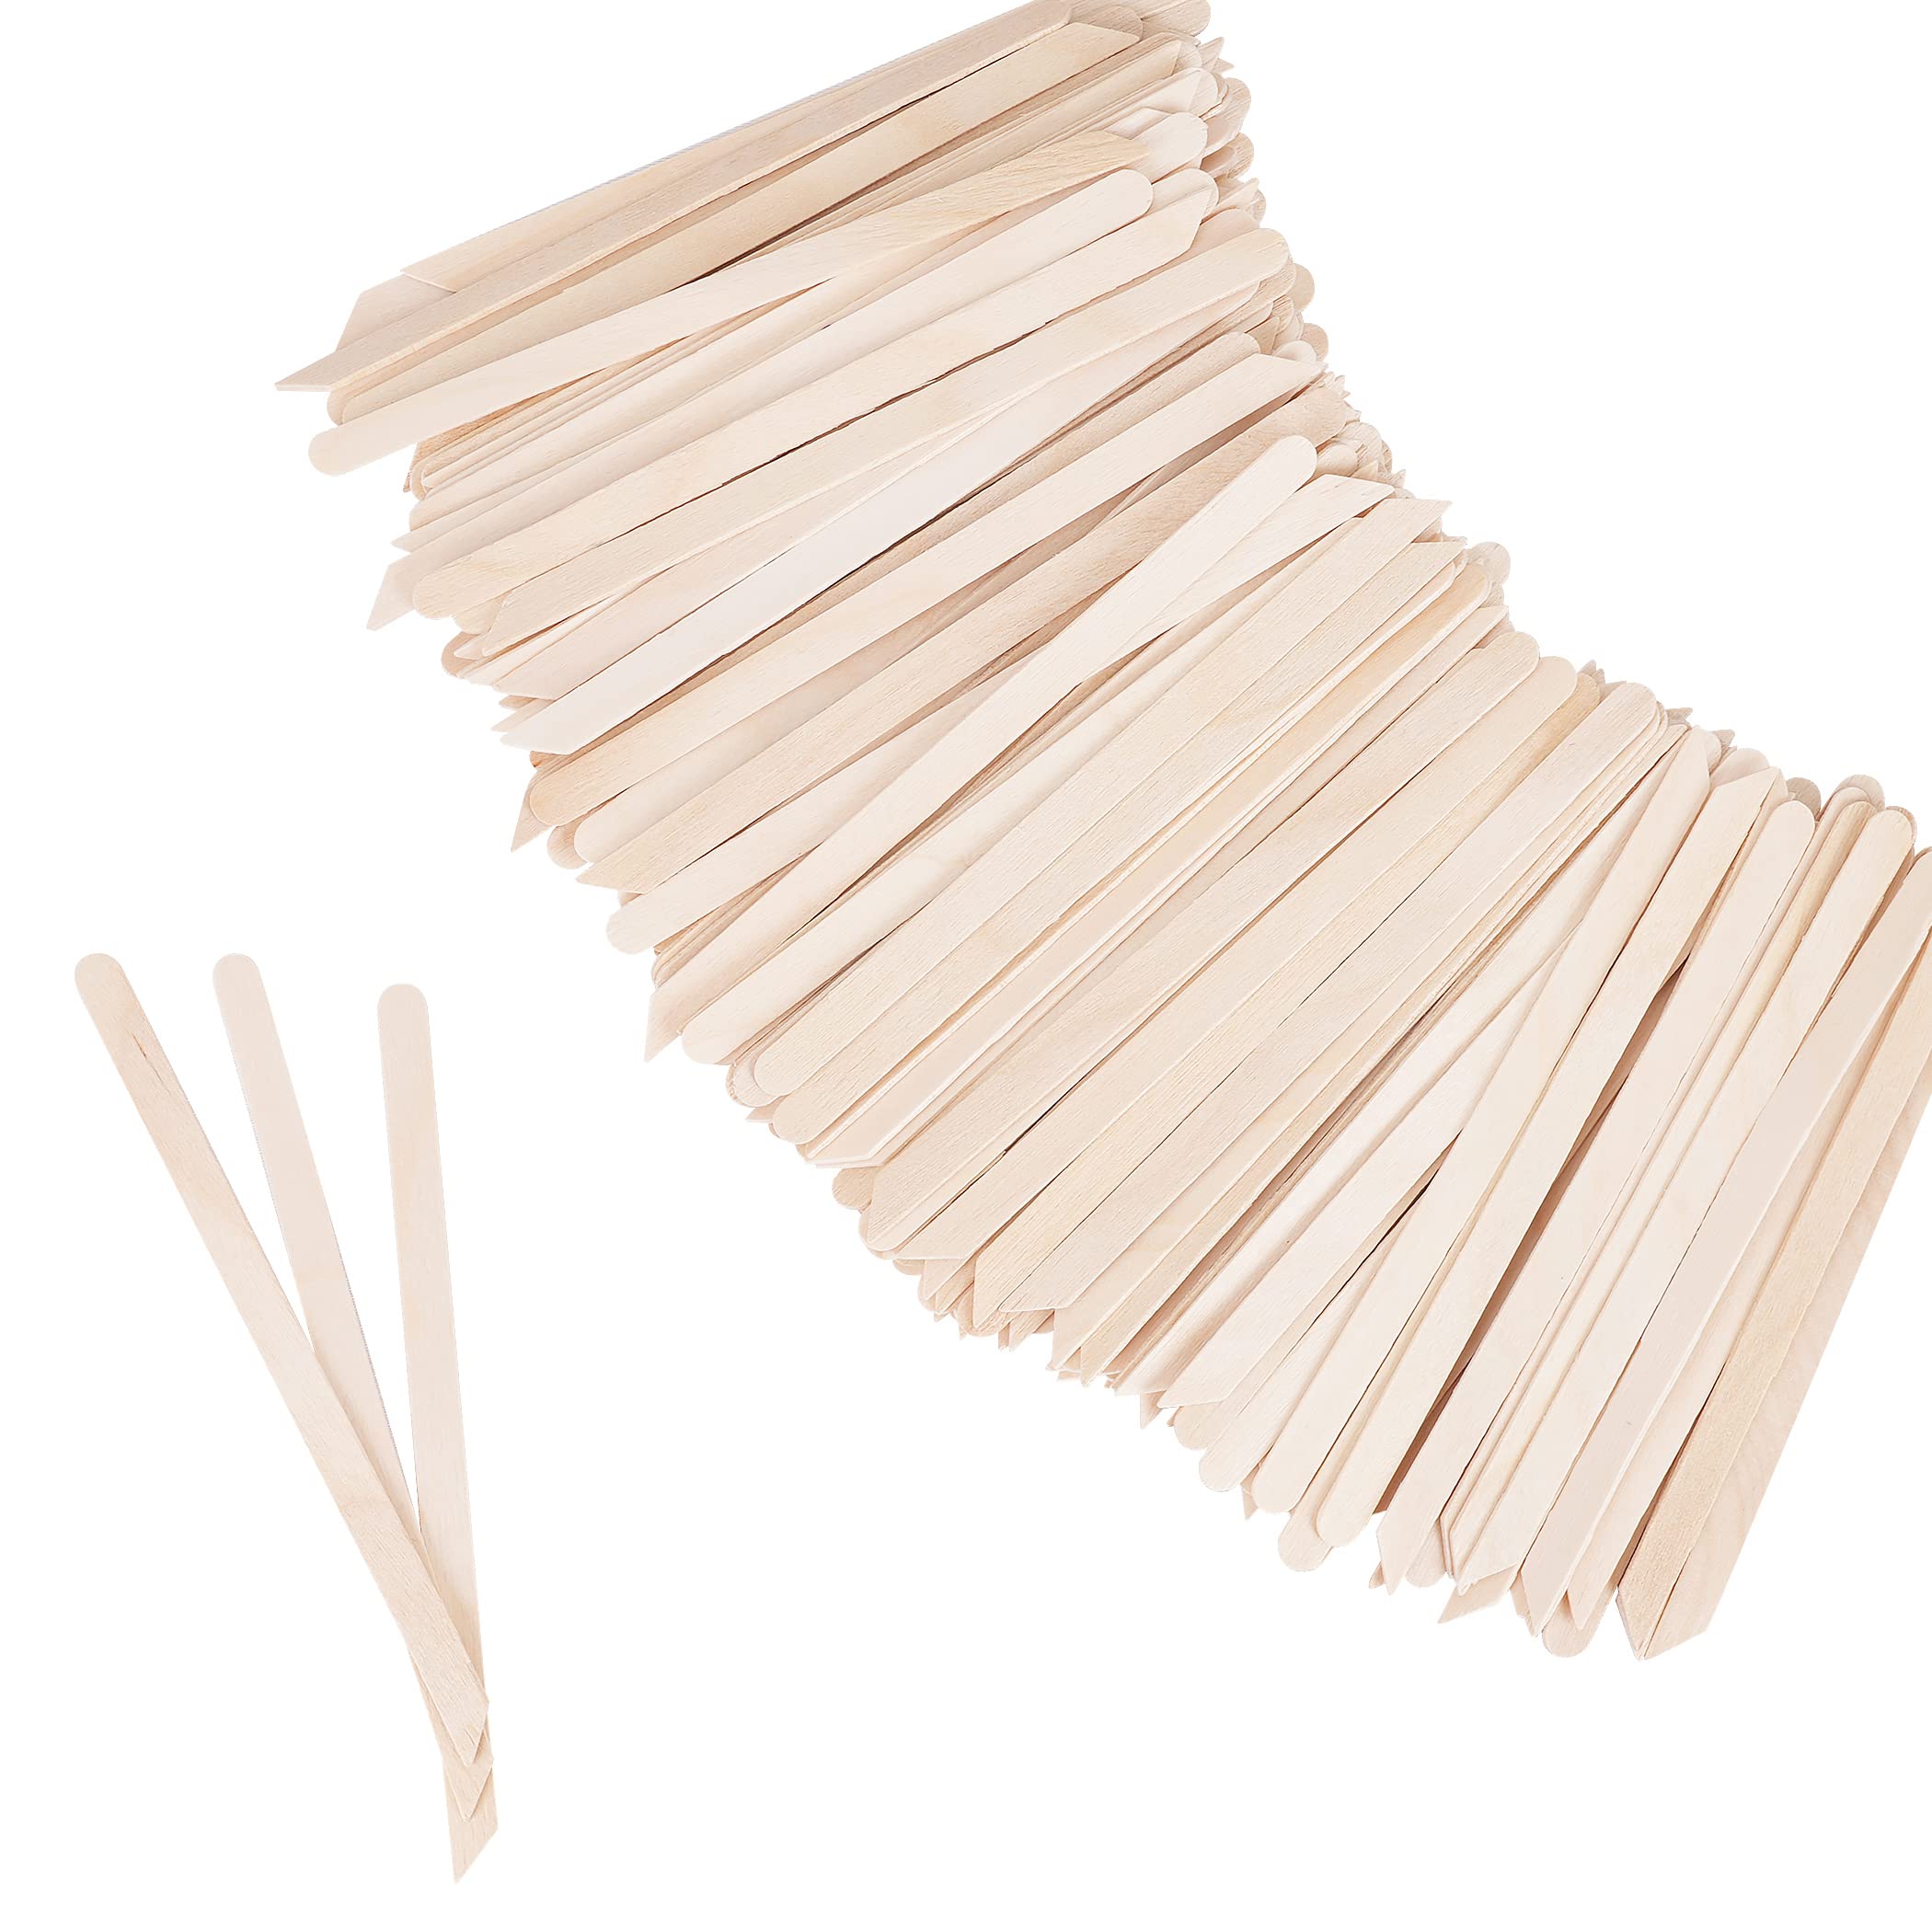 450PCS Wooden Wax Sticks, JANYUN Assorted Style Waxing Wooden Applicator  Wax Spatulas Kit for Eyebrow Face for Hair Removal Body Legs Facial,Wood